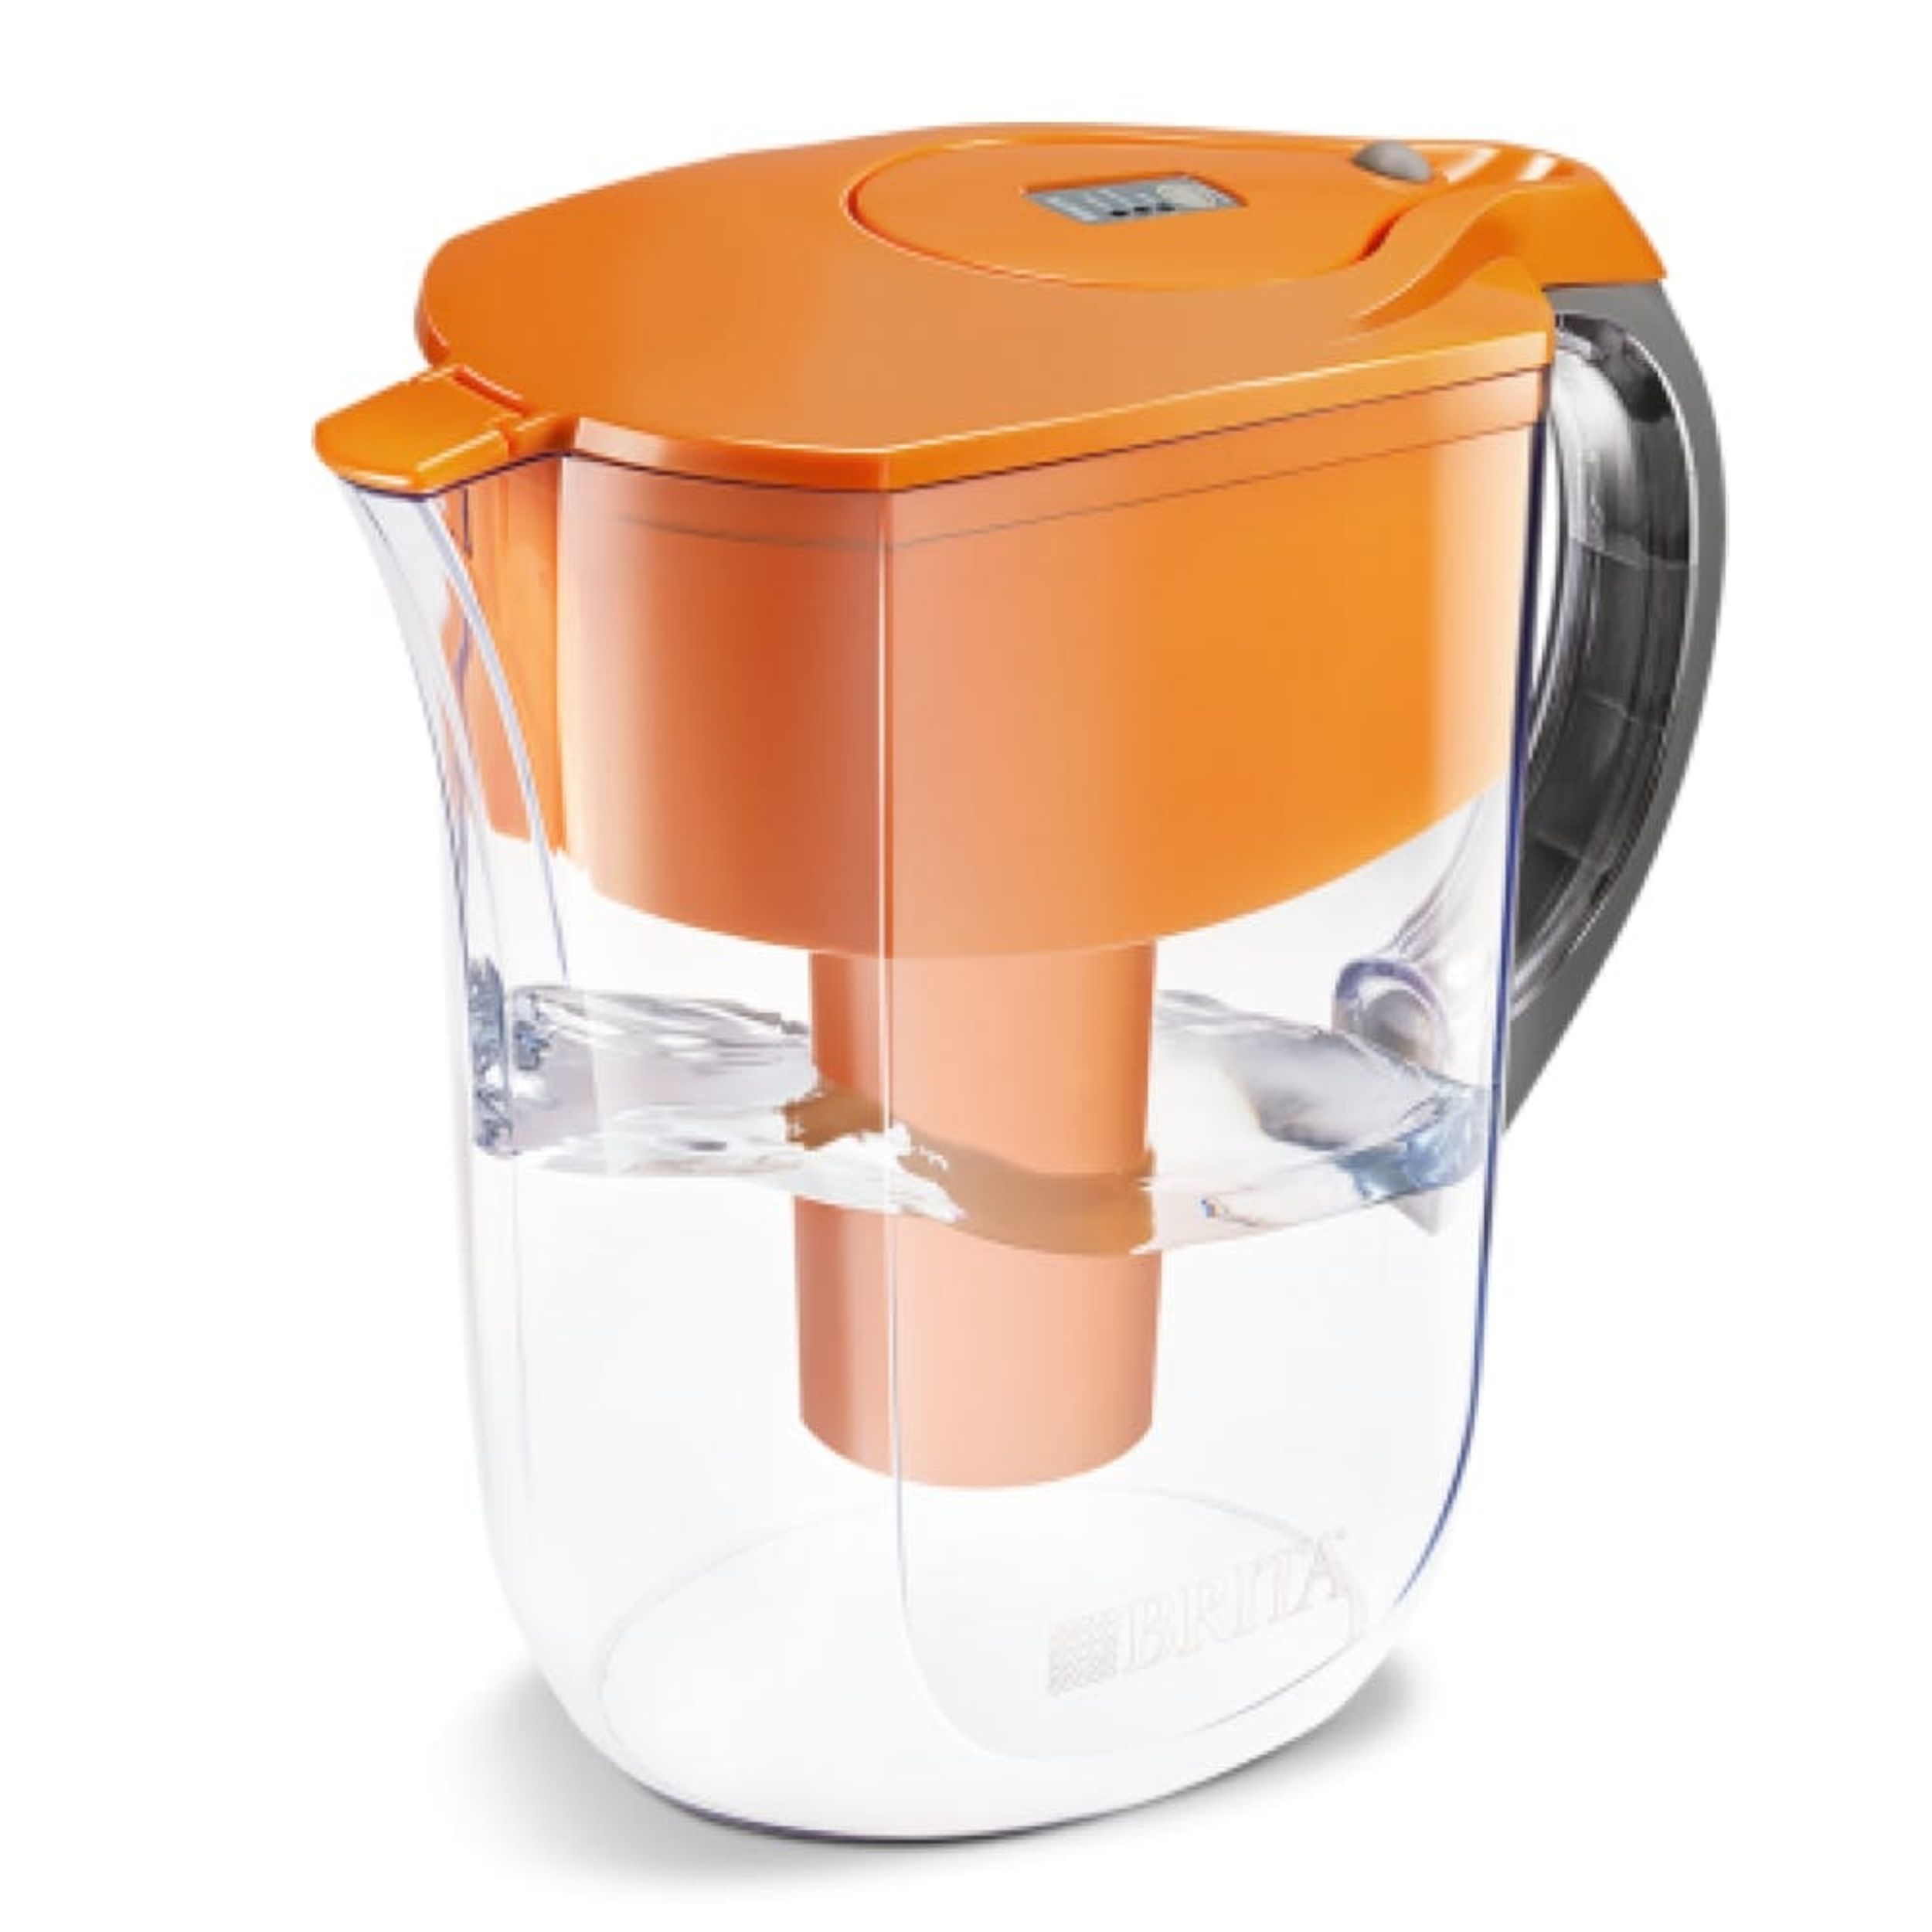 Five Water Filtering Pitchers to Stay Hydrated in Any Situation